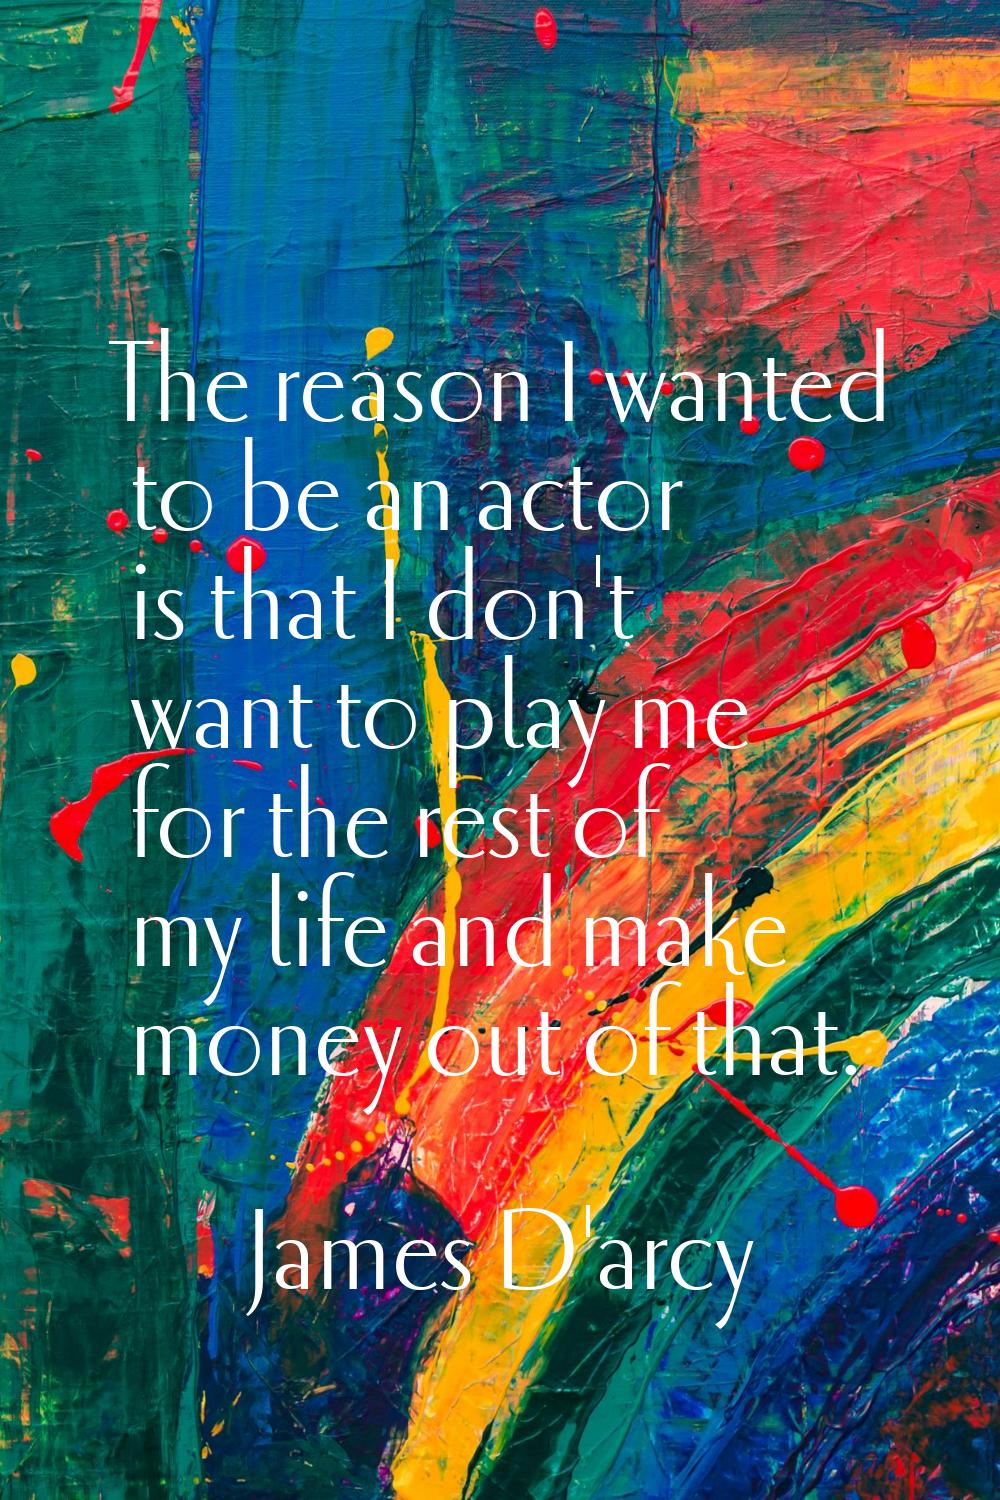 The reason I wanted to be an actor is that I don't want to play me for the rest of my life and make